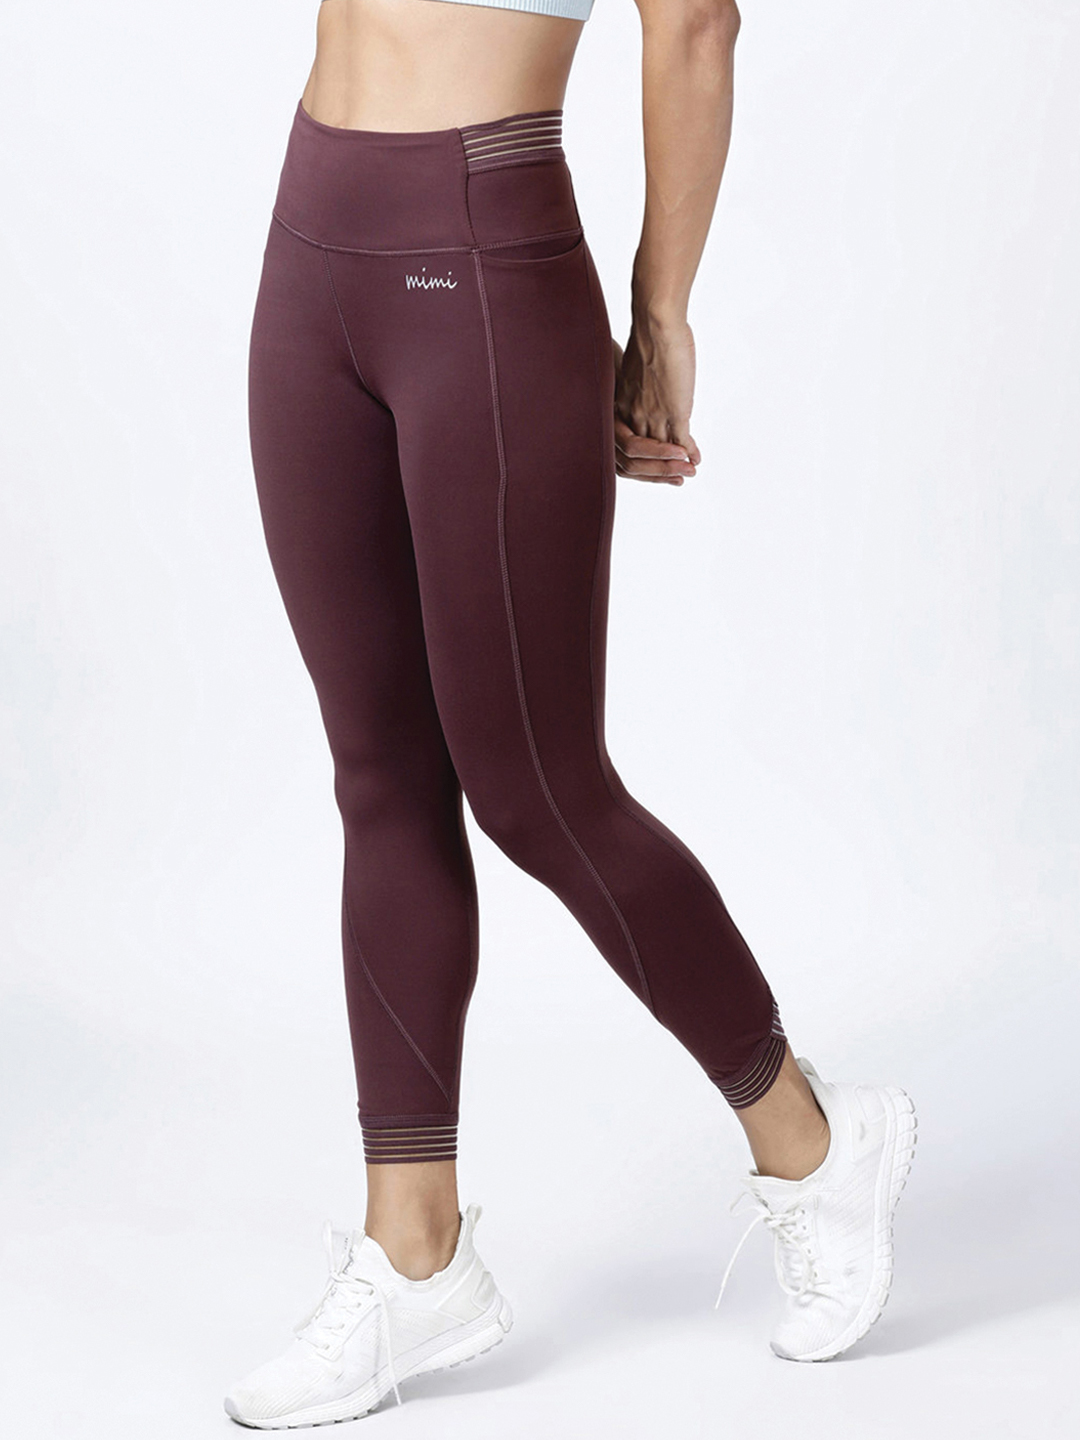 Price: 13279.00 Rs ALONG FIT Sexy Yoga Pants Sheer Side Mesh with